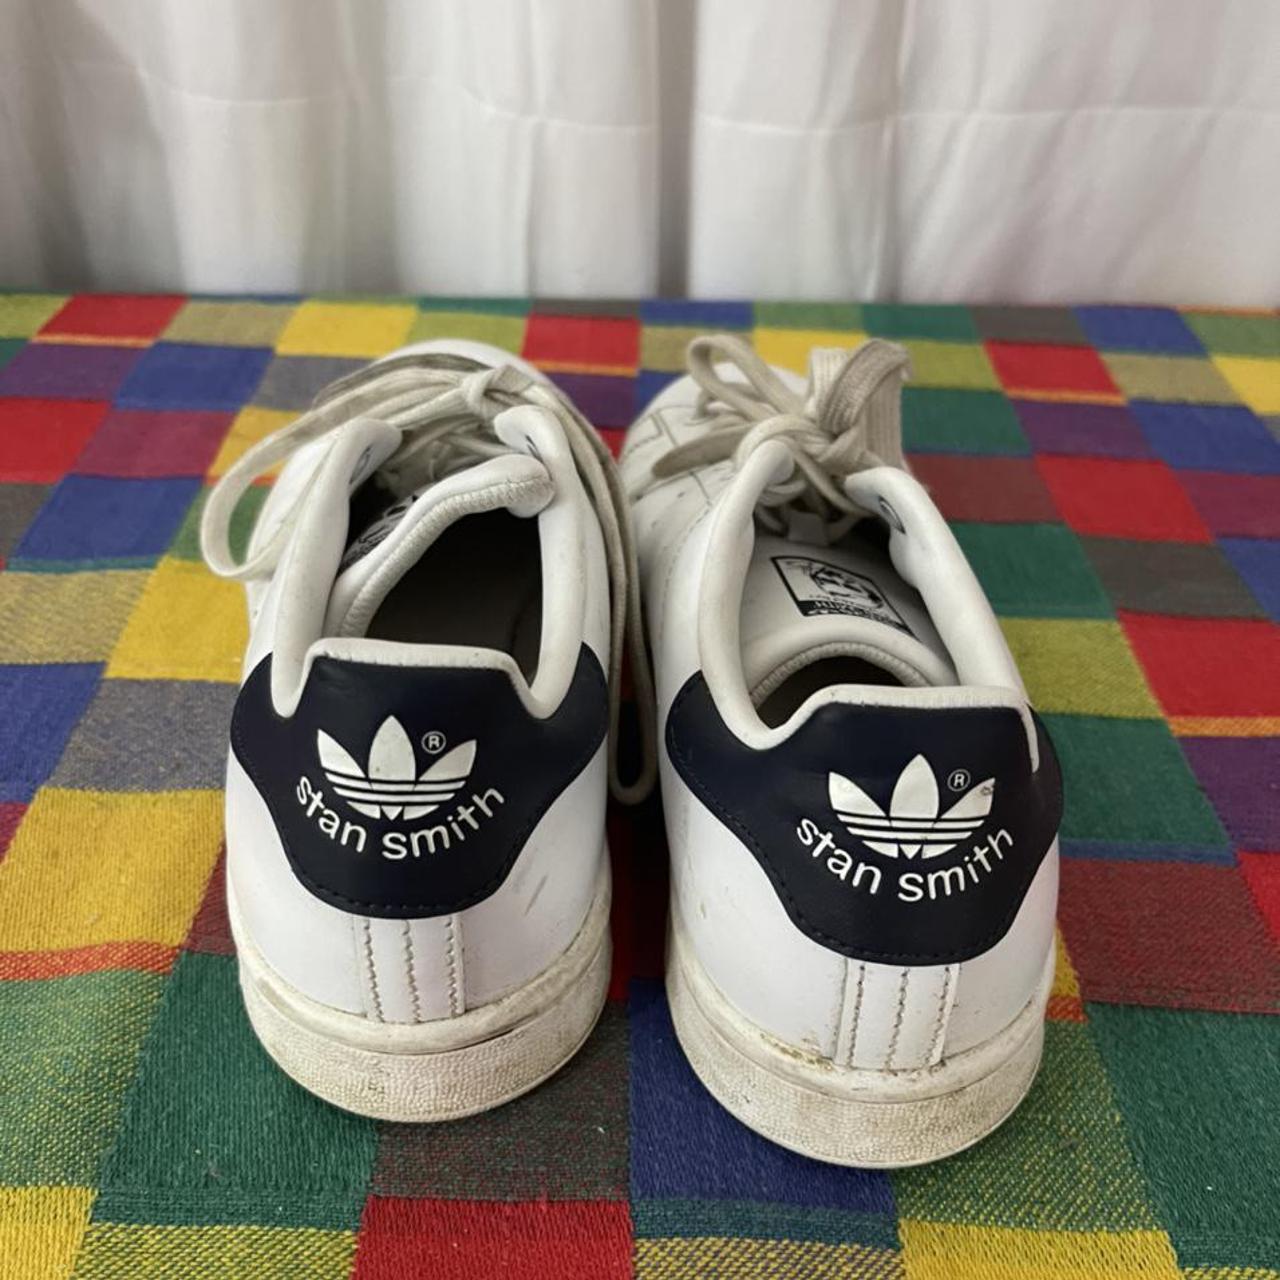 Adidas Men's White and Blue Trainers (3)